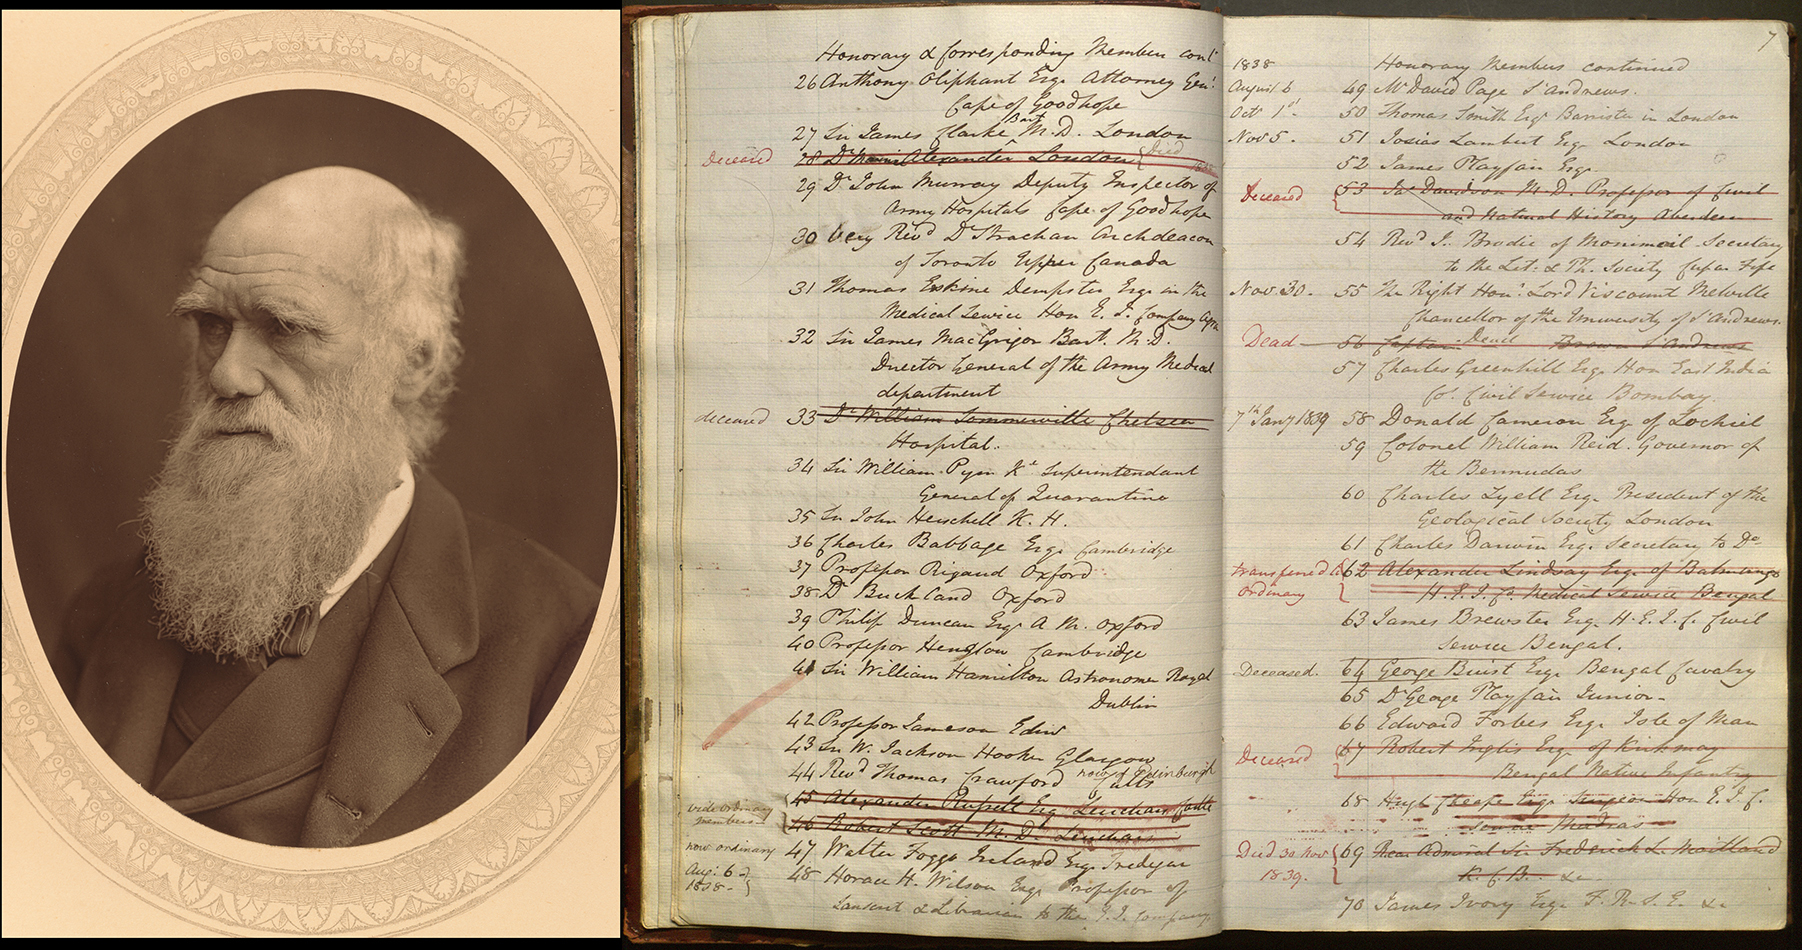 Left: Charles Darwin, woodburytype from Thompson Cooper, Men of Mark , 1878. rCT782-C7-vol-3-36 Right: Honorary members list in front of minute book, featuring 61 Charles Darwin esq., Secretary to the Geological Society of London, UYUY8525 p. 7r.